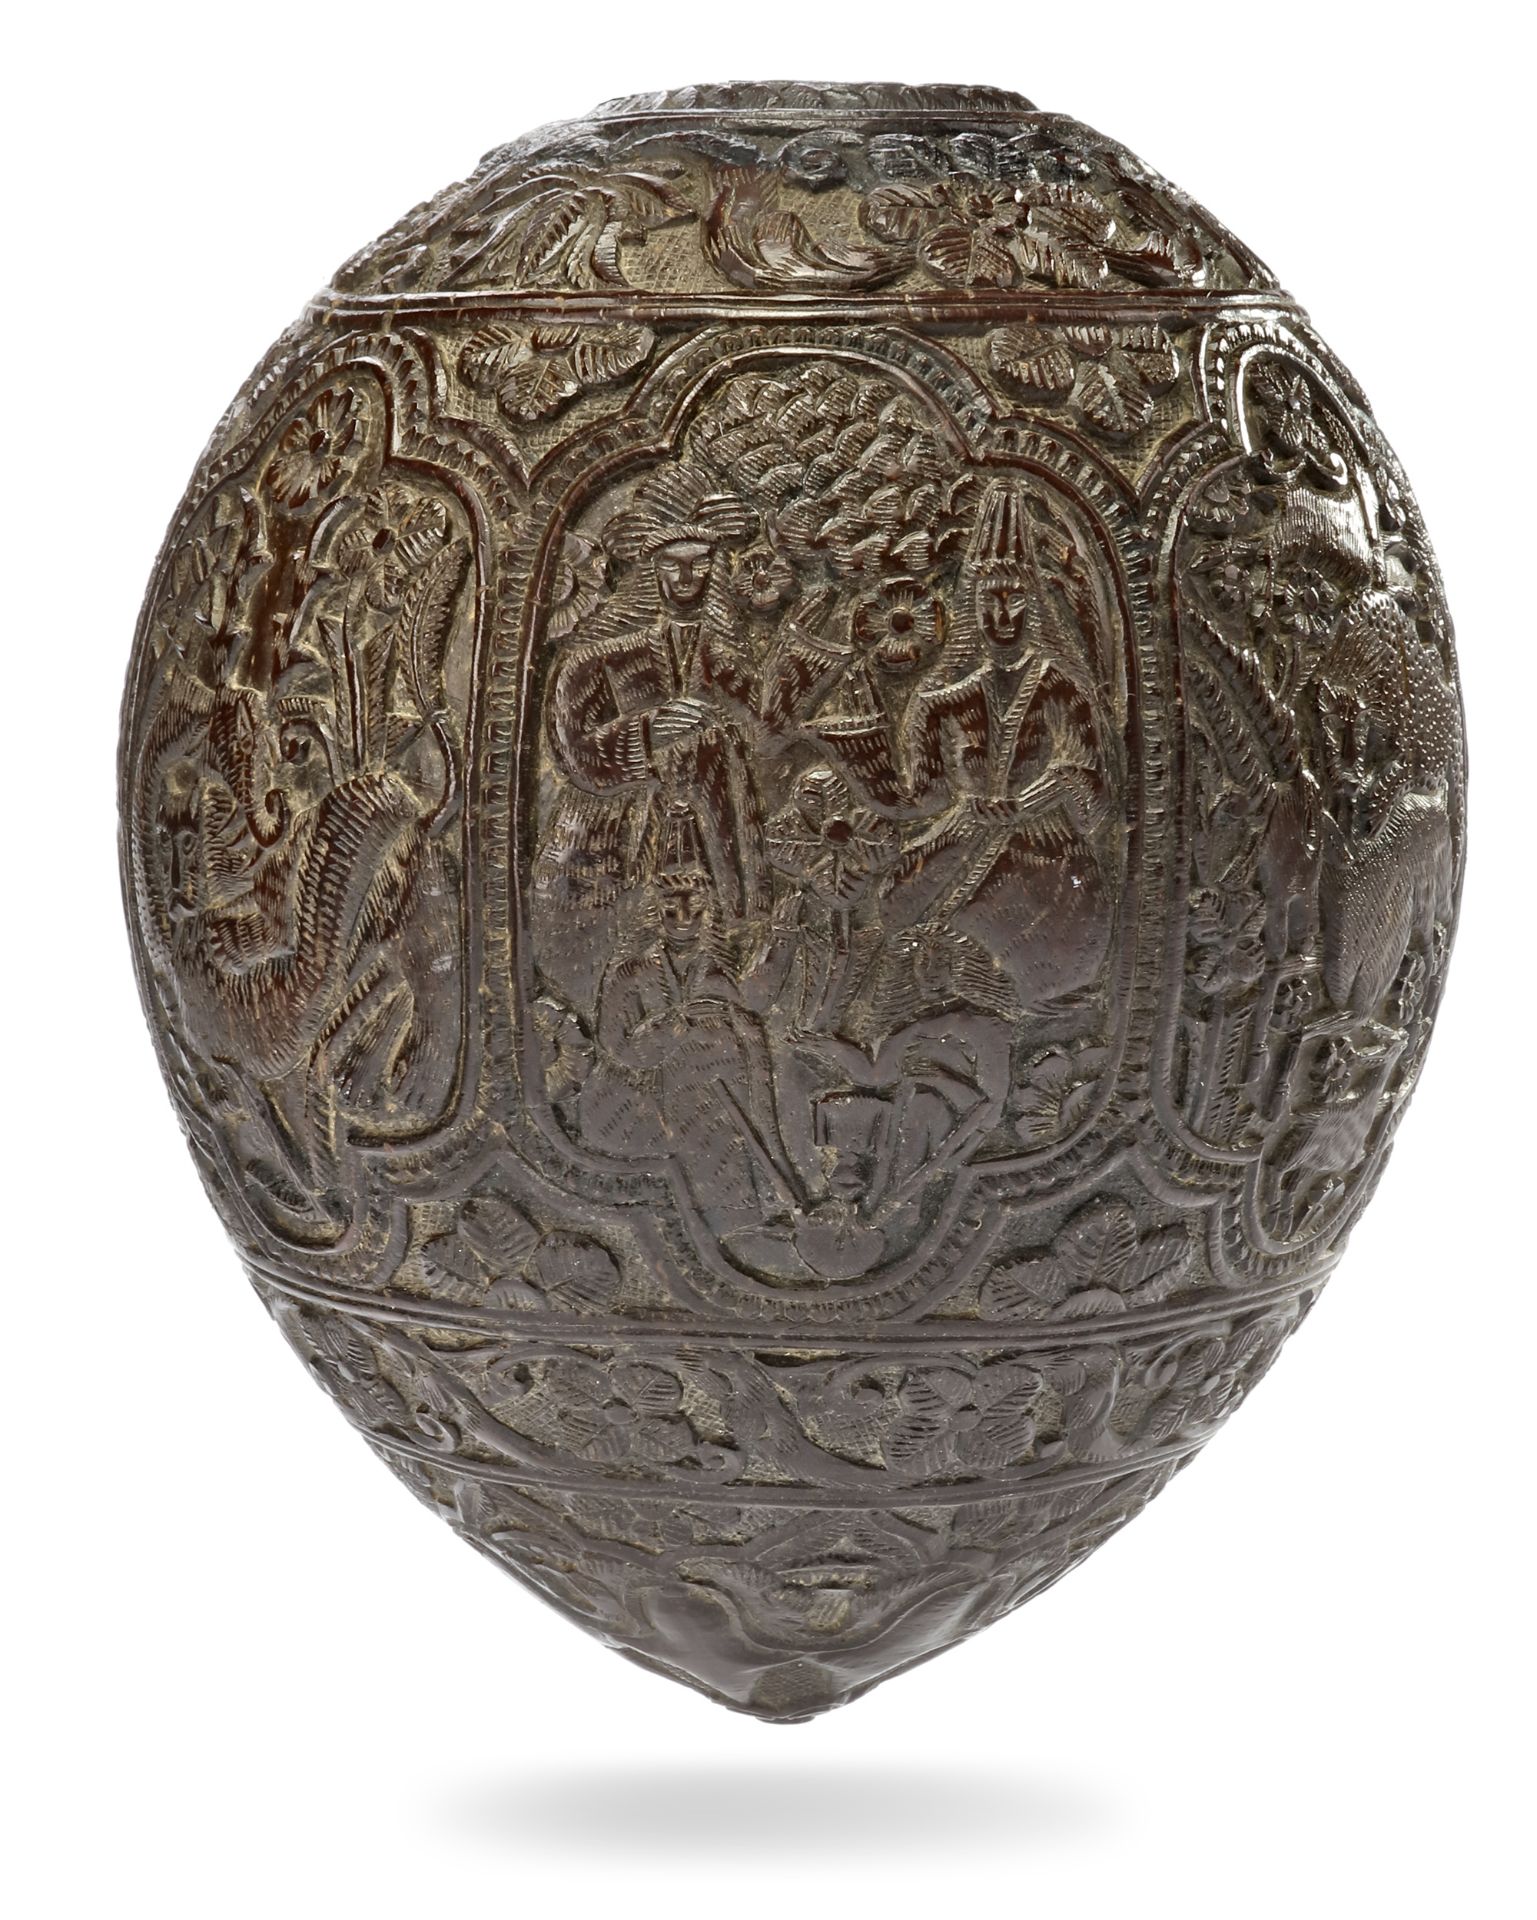 A QAJAR CARVED COCONUT HUQQA BASE, PERSIA, EARLY 19TH CENTURY - Image 7 of 9